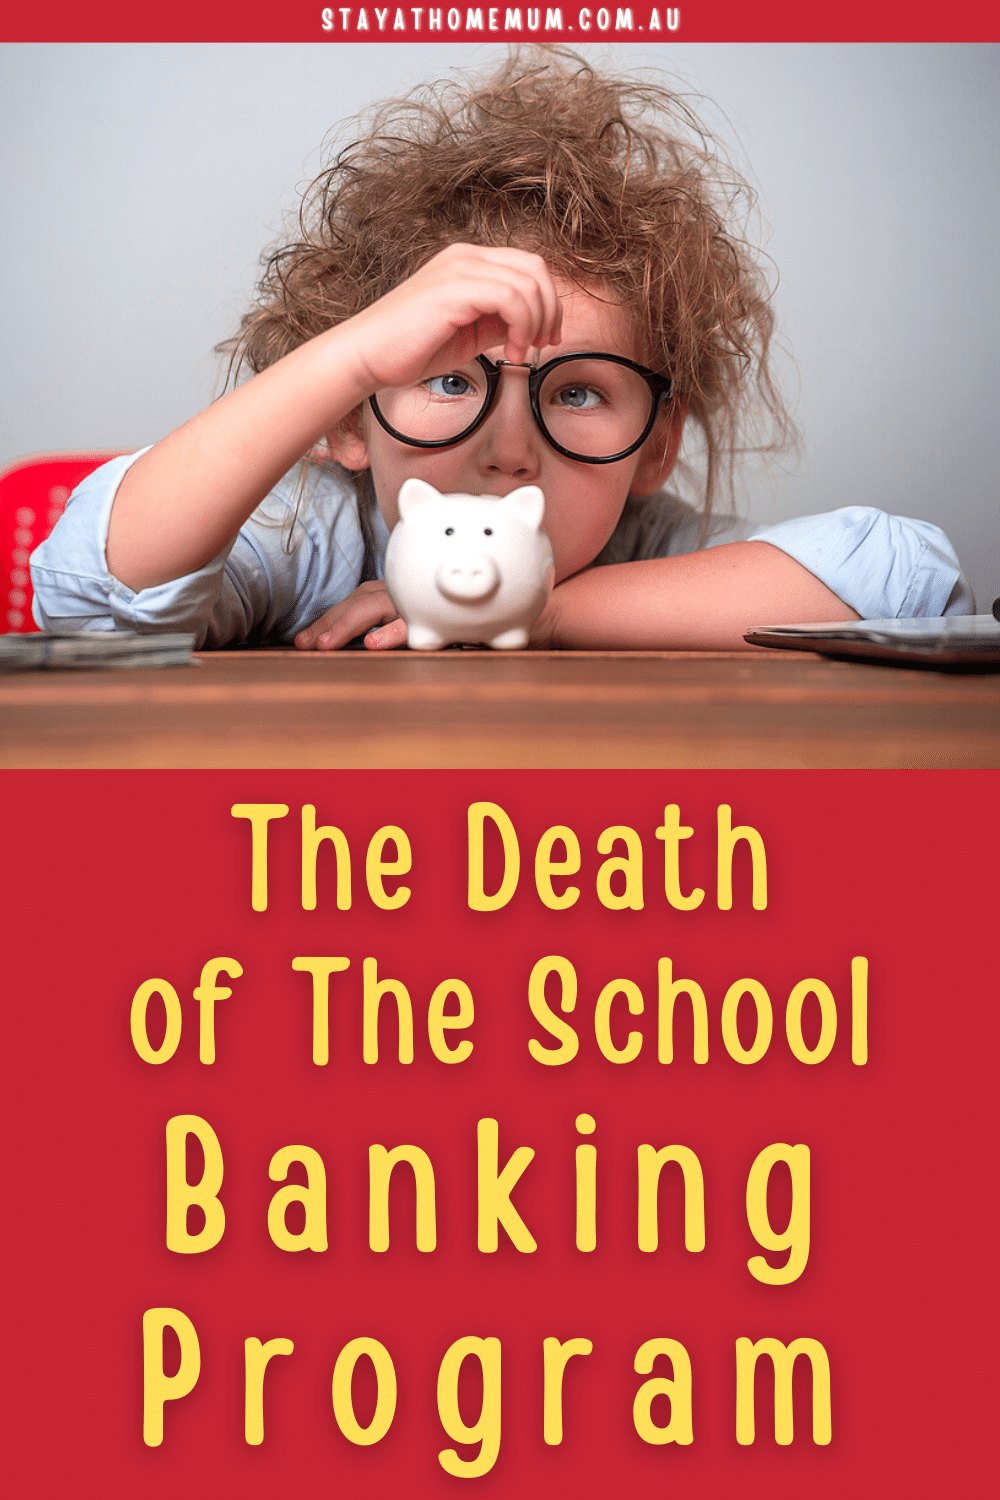 The Death of The School Banking Program | Stay at Home Mum.com.au